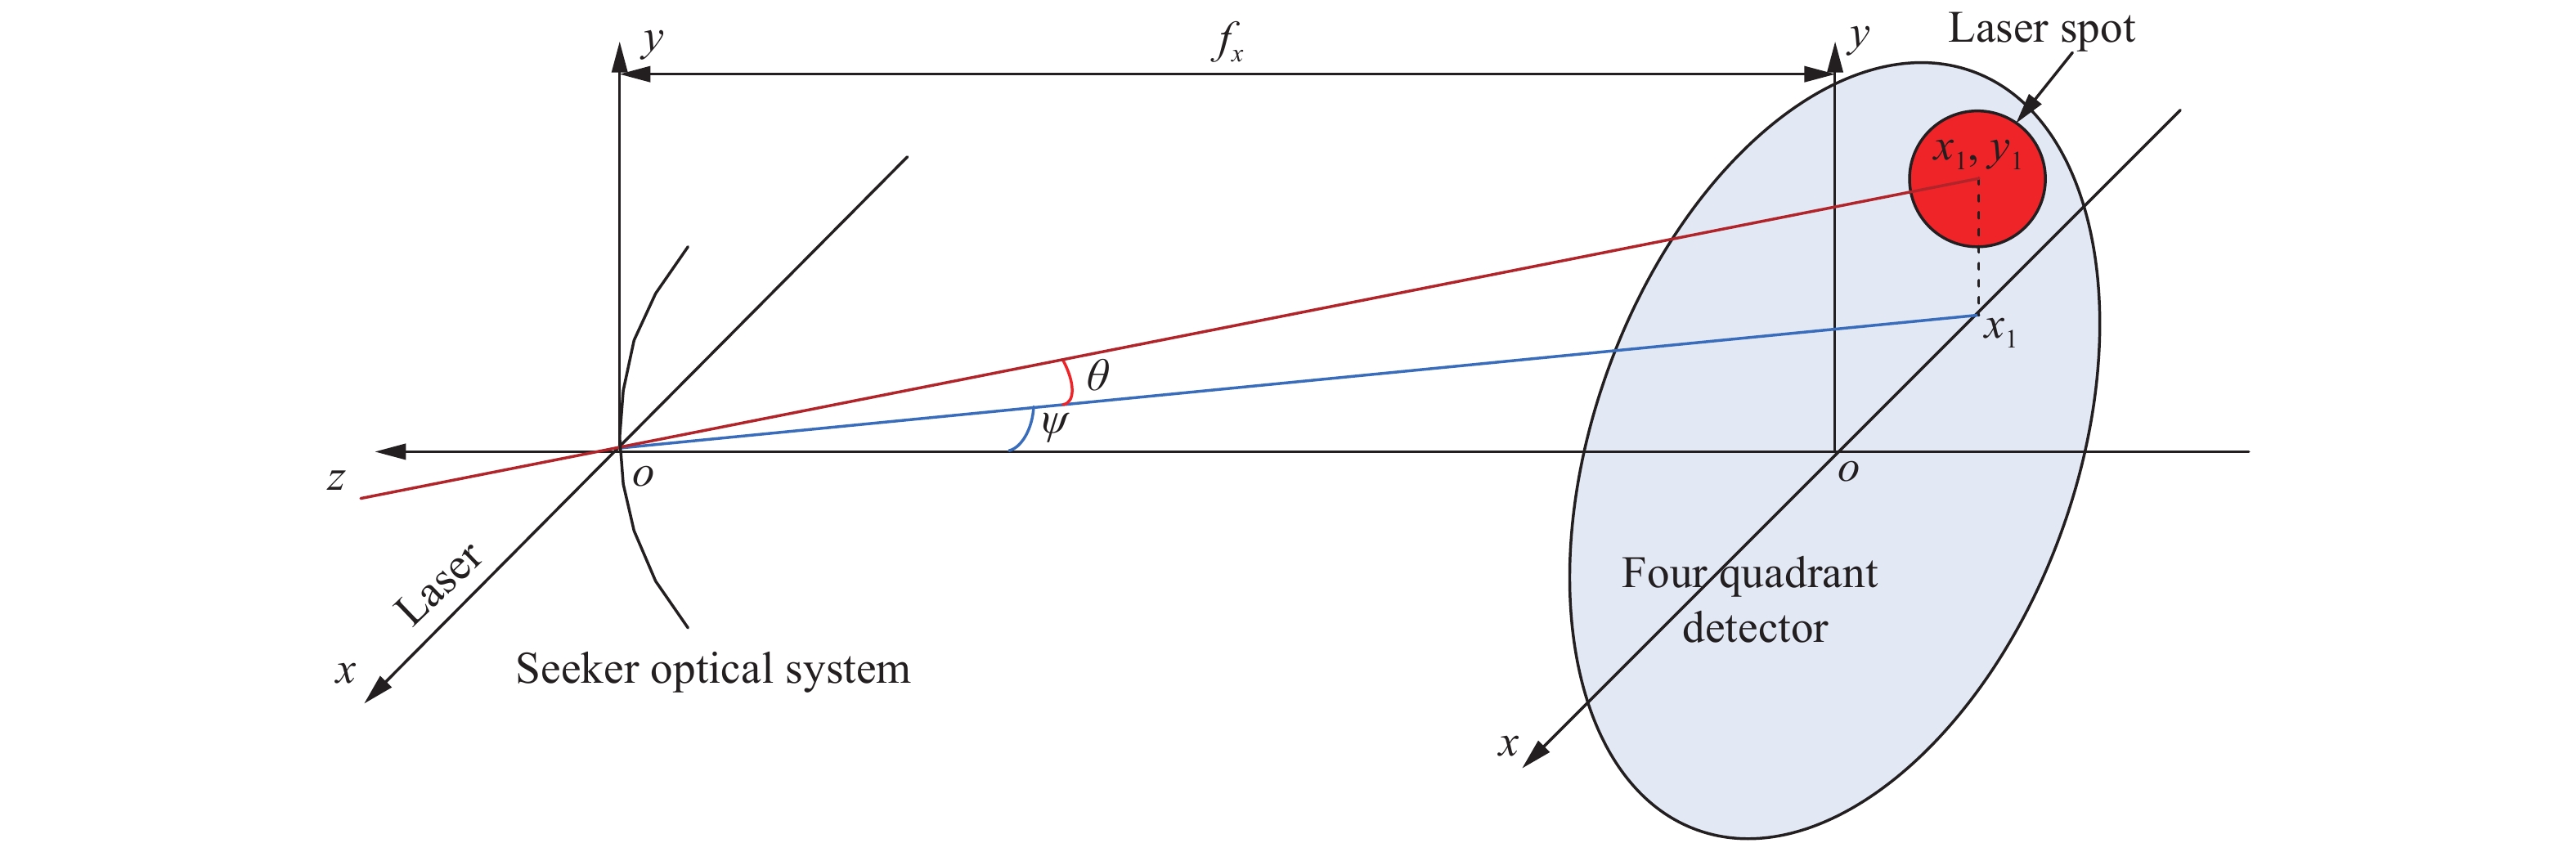 Relationship between beam deflection angle and center coordinates of spot